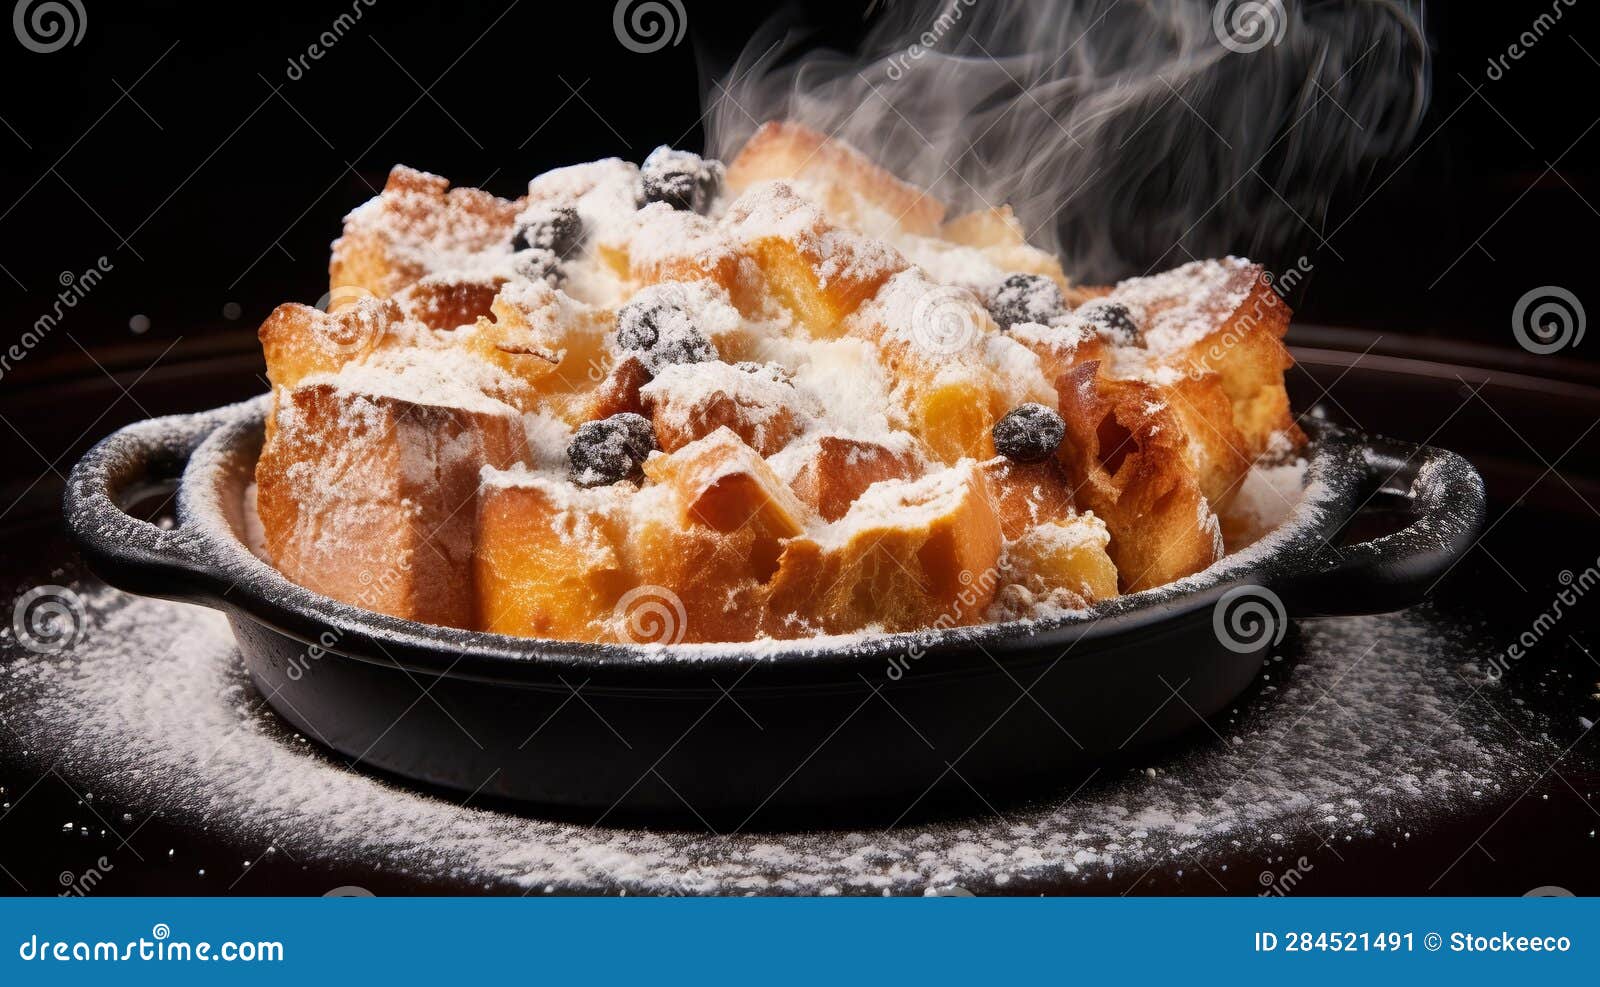 delicious jazz bread pudding with a delicate dusting of powdered sugar